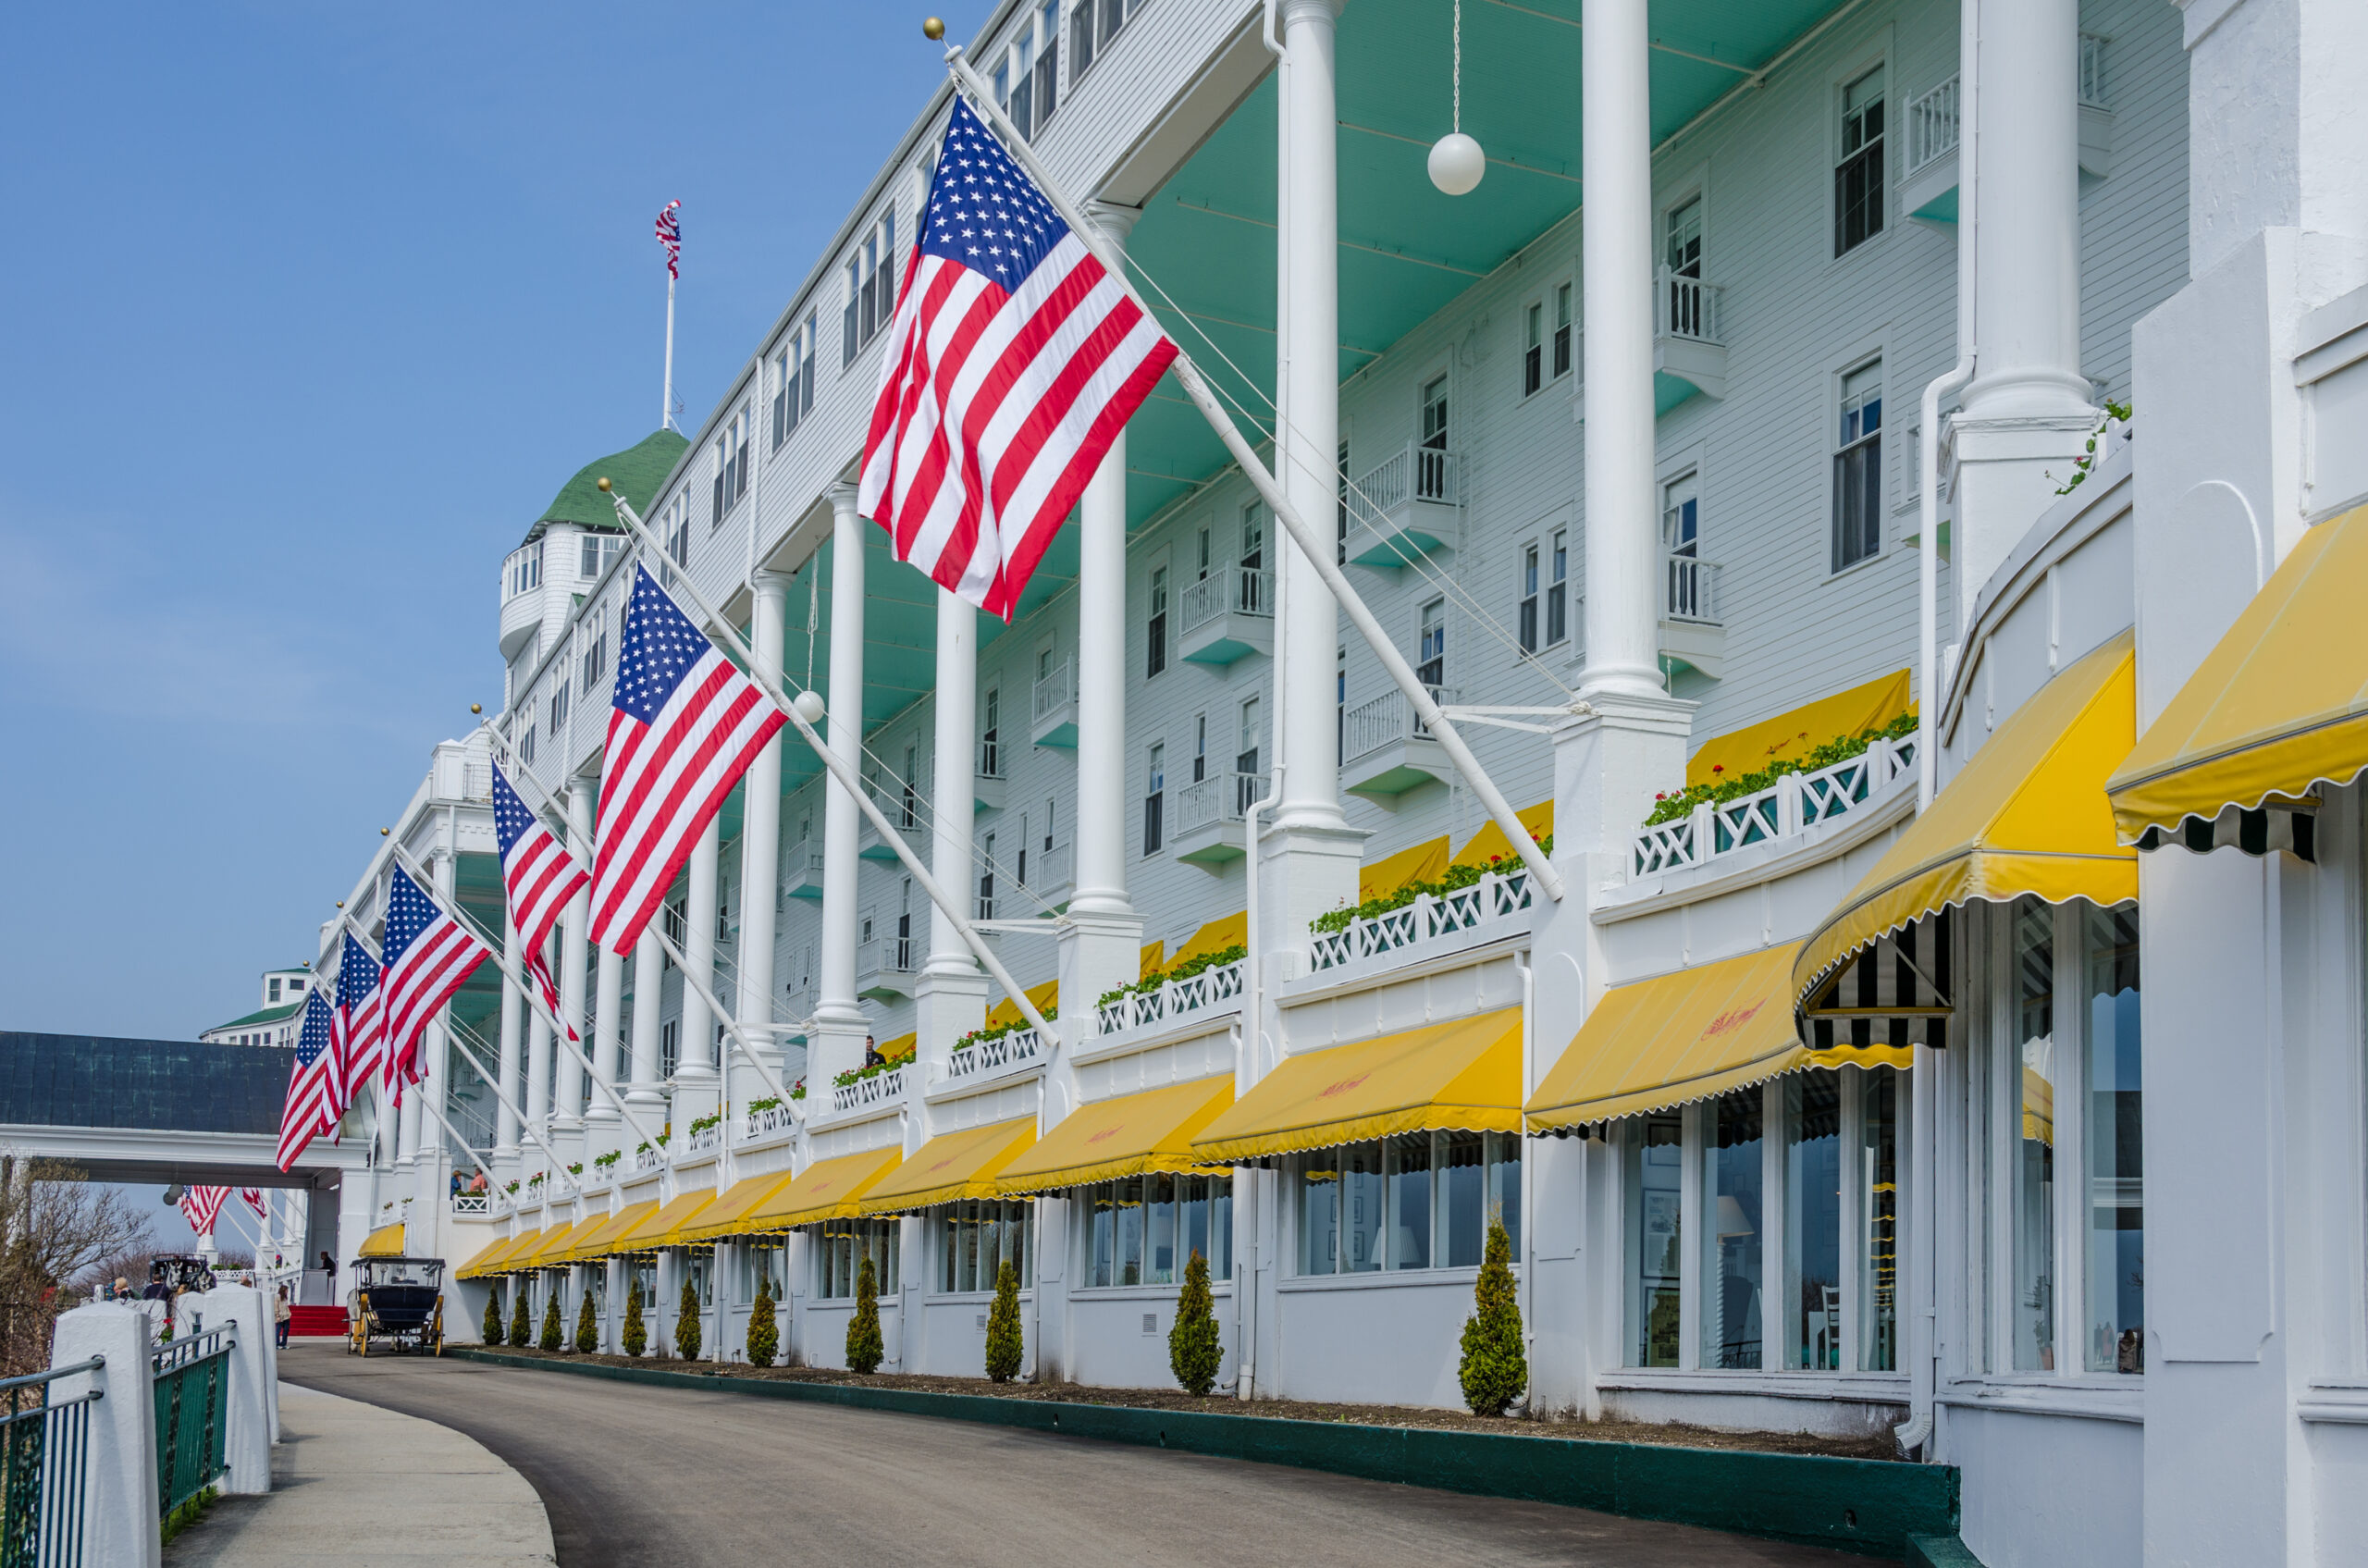 Grand Hotel - Mackinac Island Michigan / American flags proudly hang in front of the Grand Hotel in Northern Michigan that has been welcoming guests since 1887.